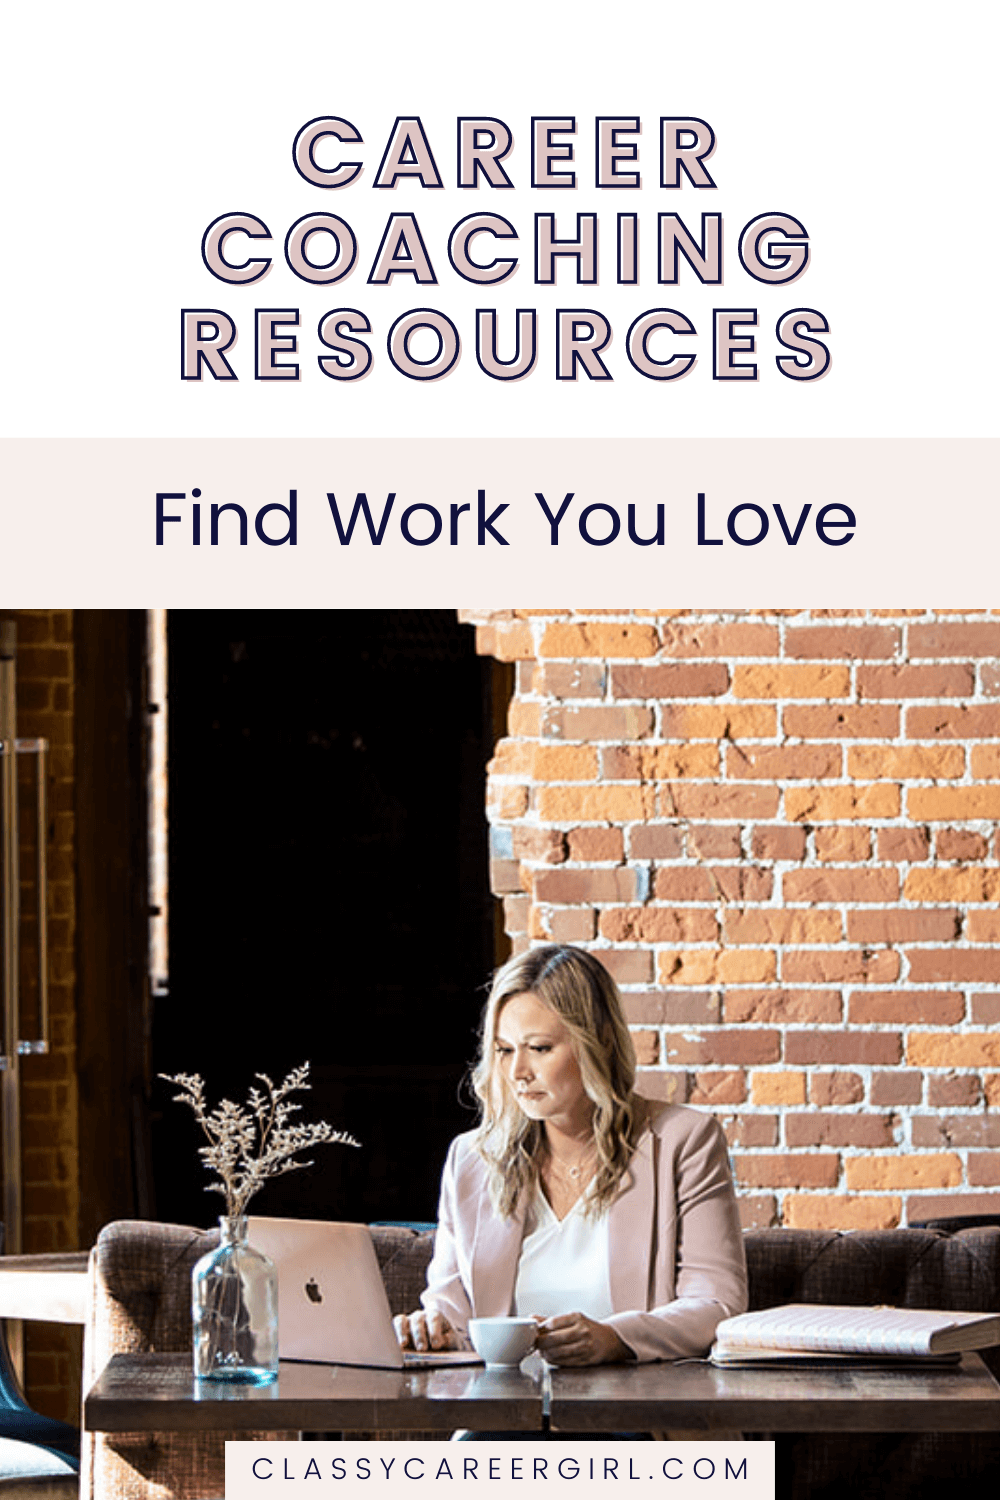 Career Coaching Resources for job searching